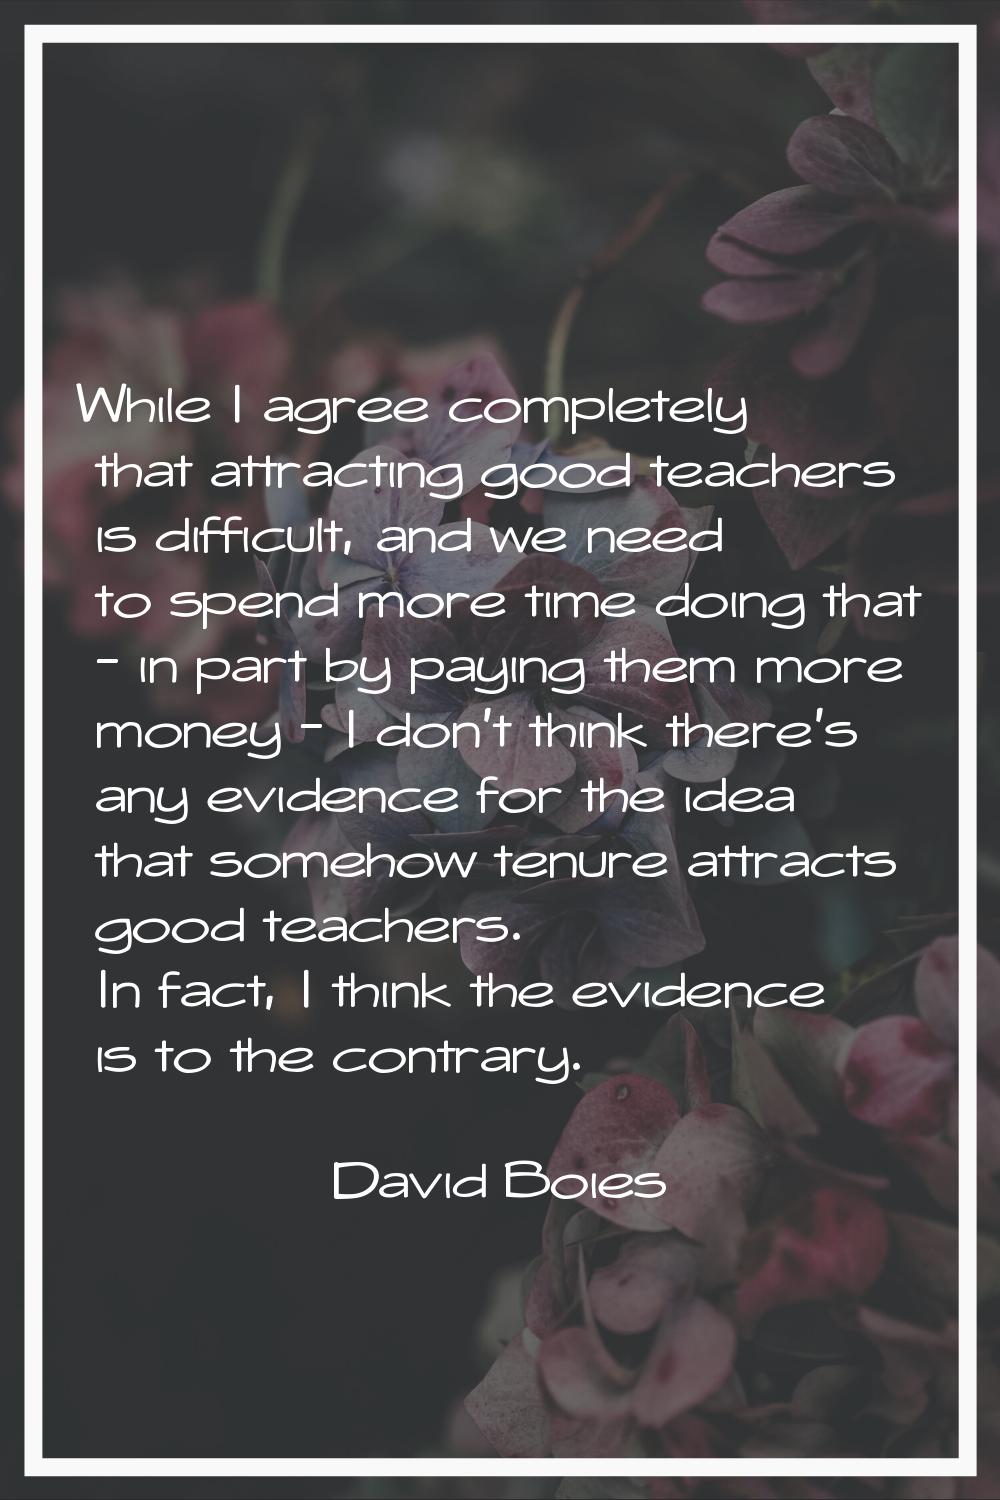 While I agree completely that attracting good teachers is difficult, and we need to spend more time